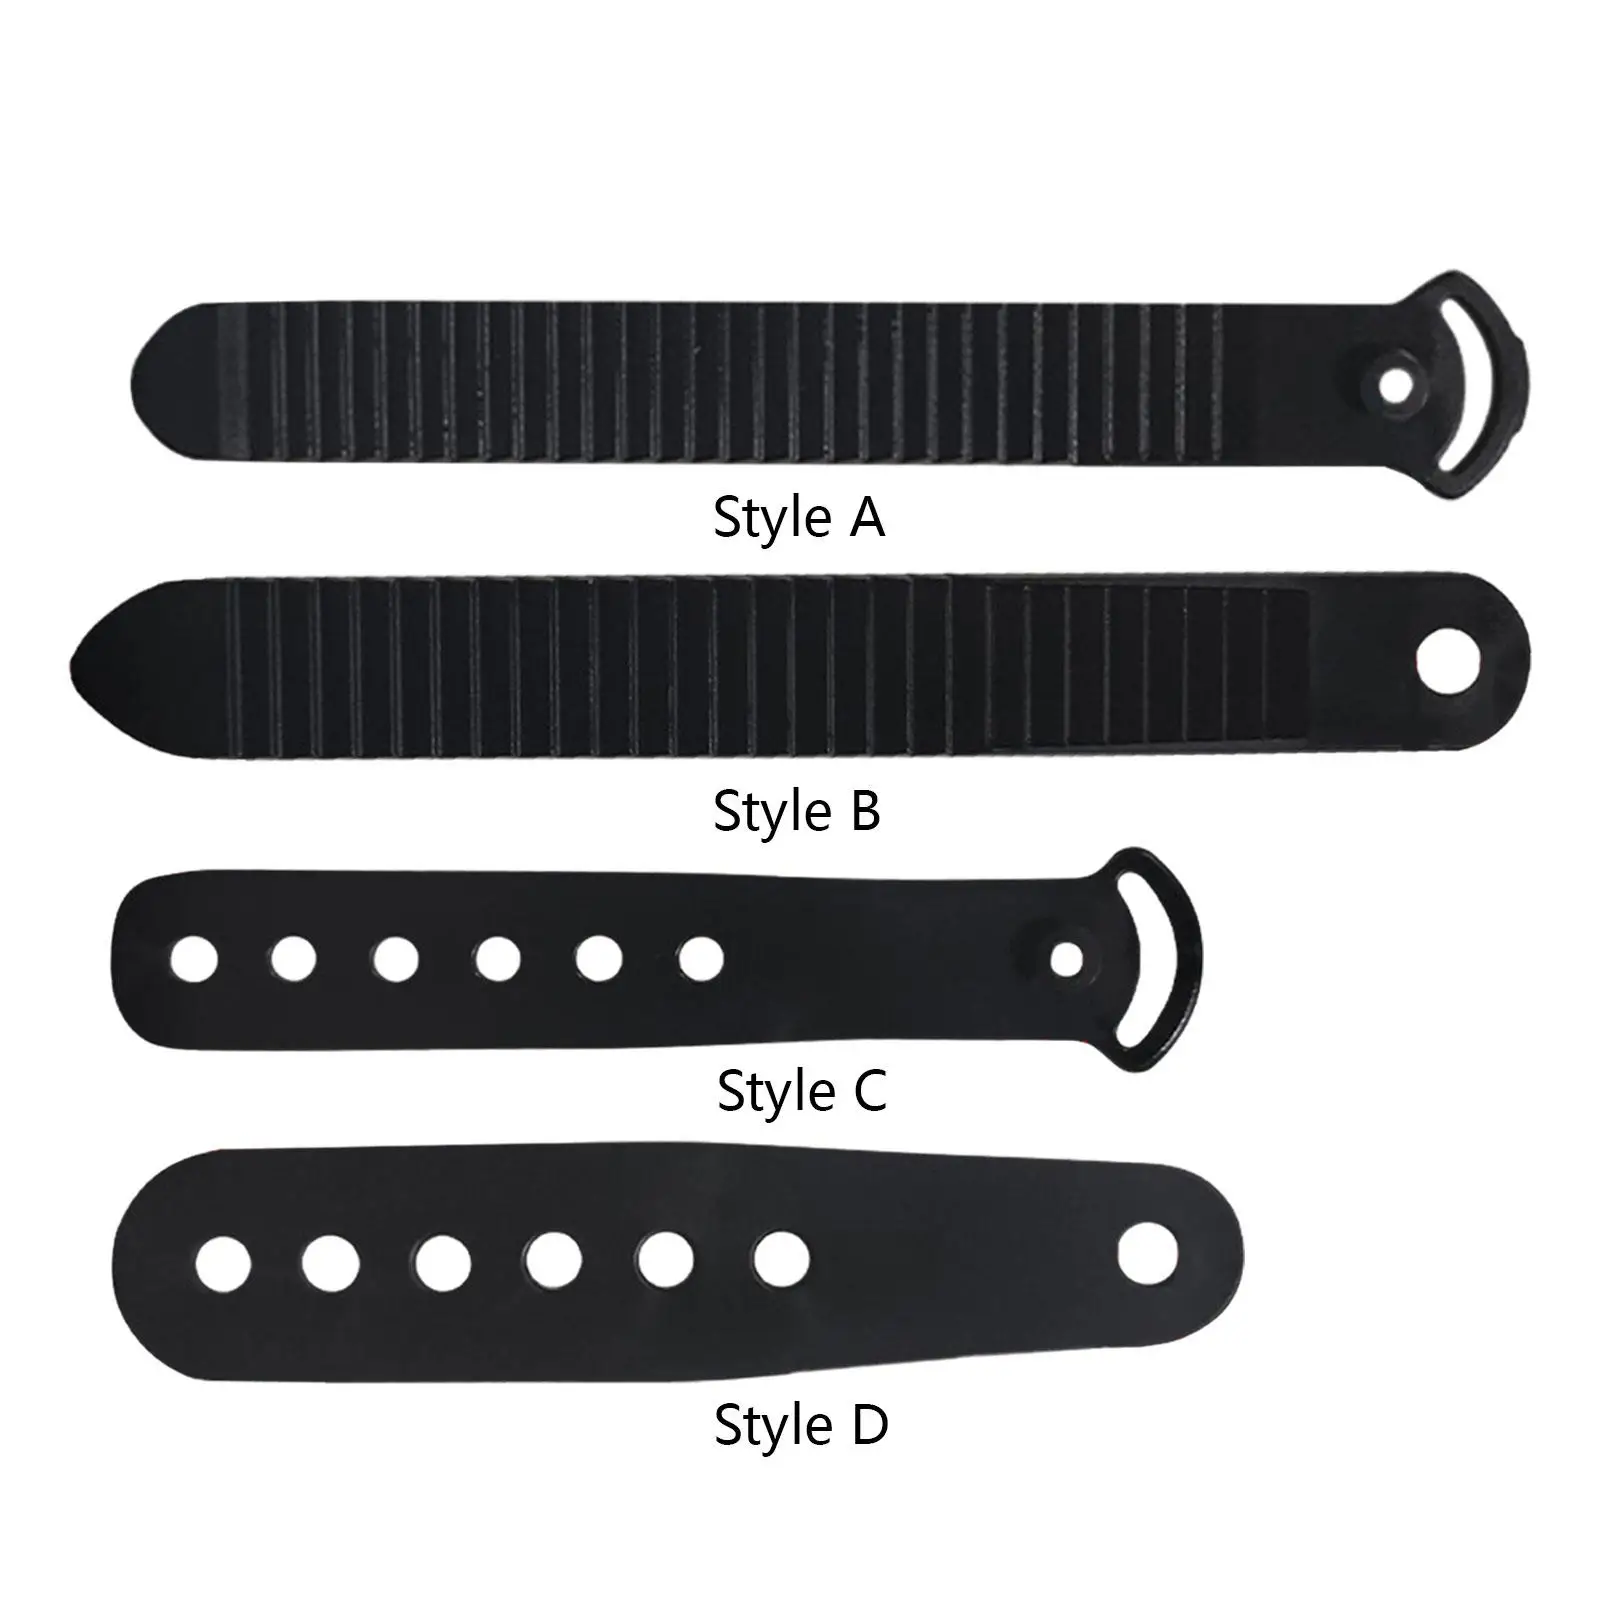 Snowboard Ankle Ladder Strap Parts Replacement Snowboard Gear Accessories Durable Snowboard Ladder Strap for Sports Snow Skiing